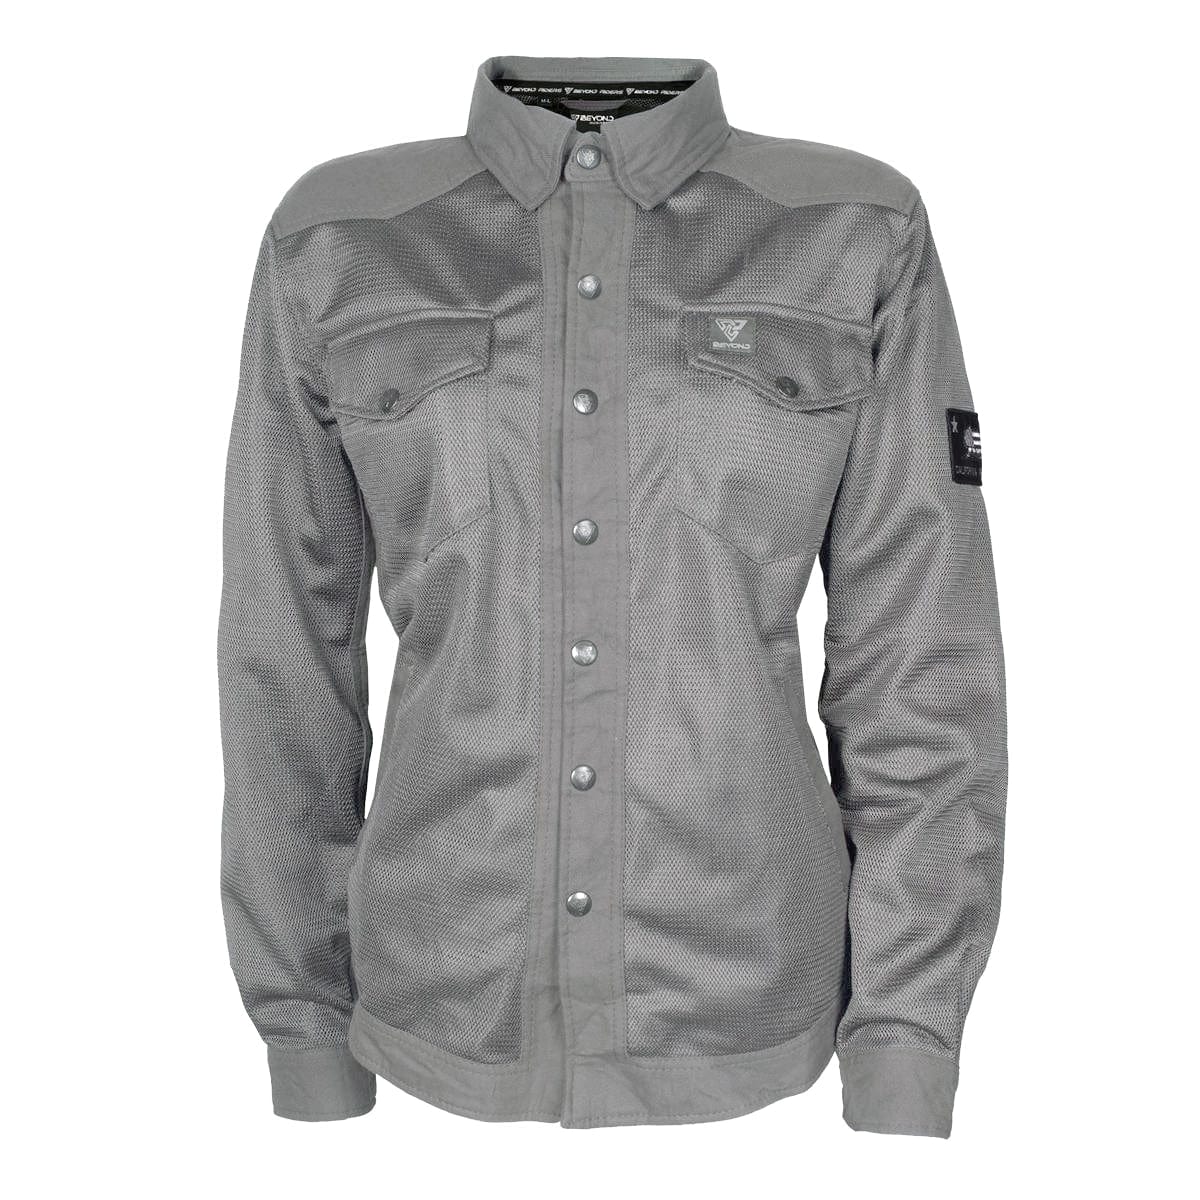 Protective Summer Mesh Shirt for Women - Grey Solid with Pads